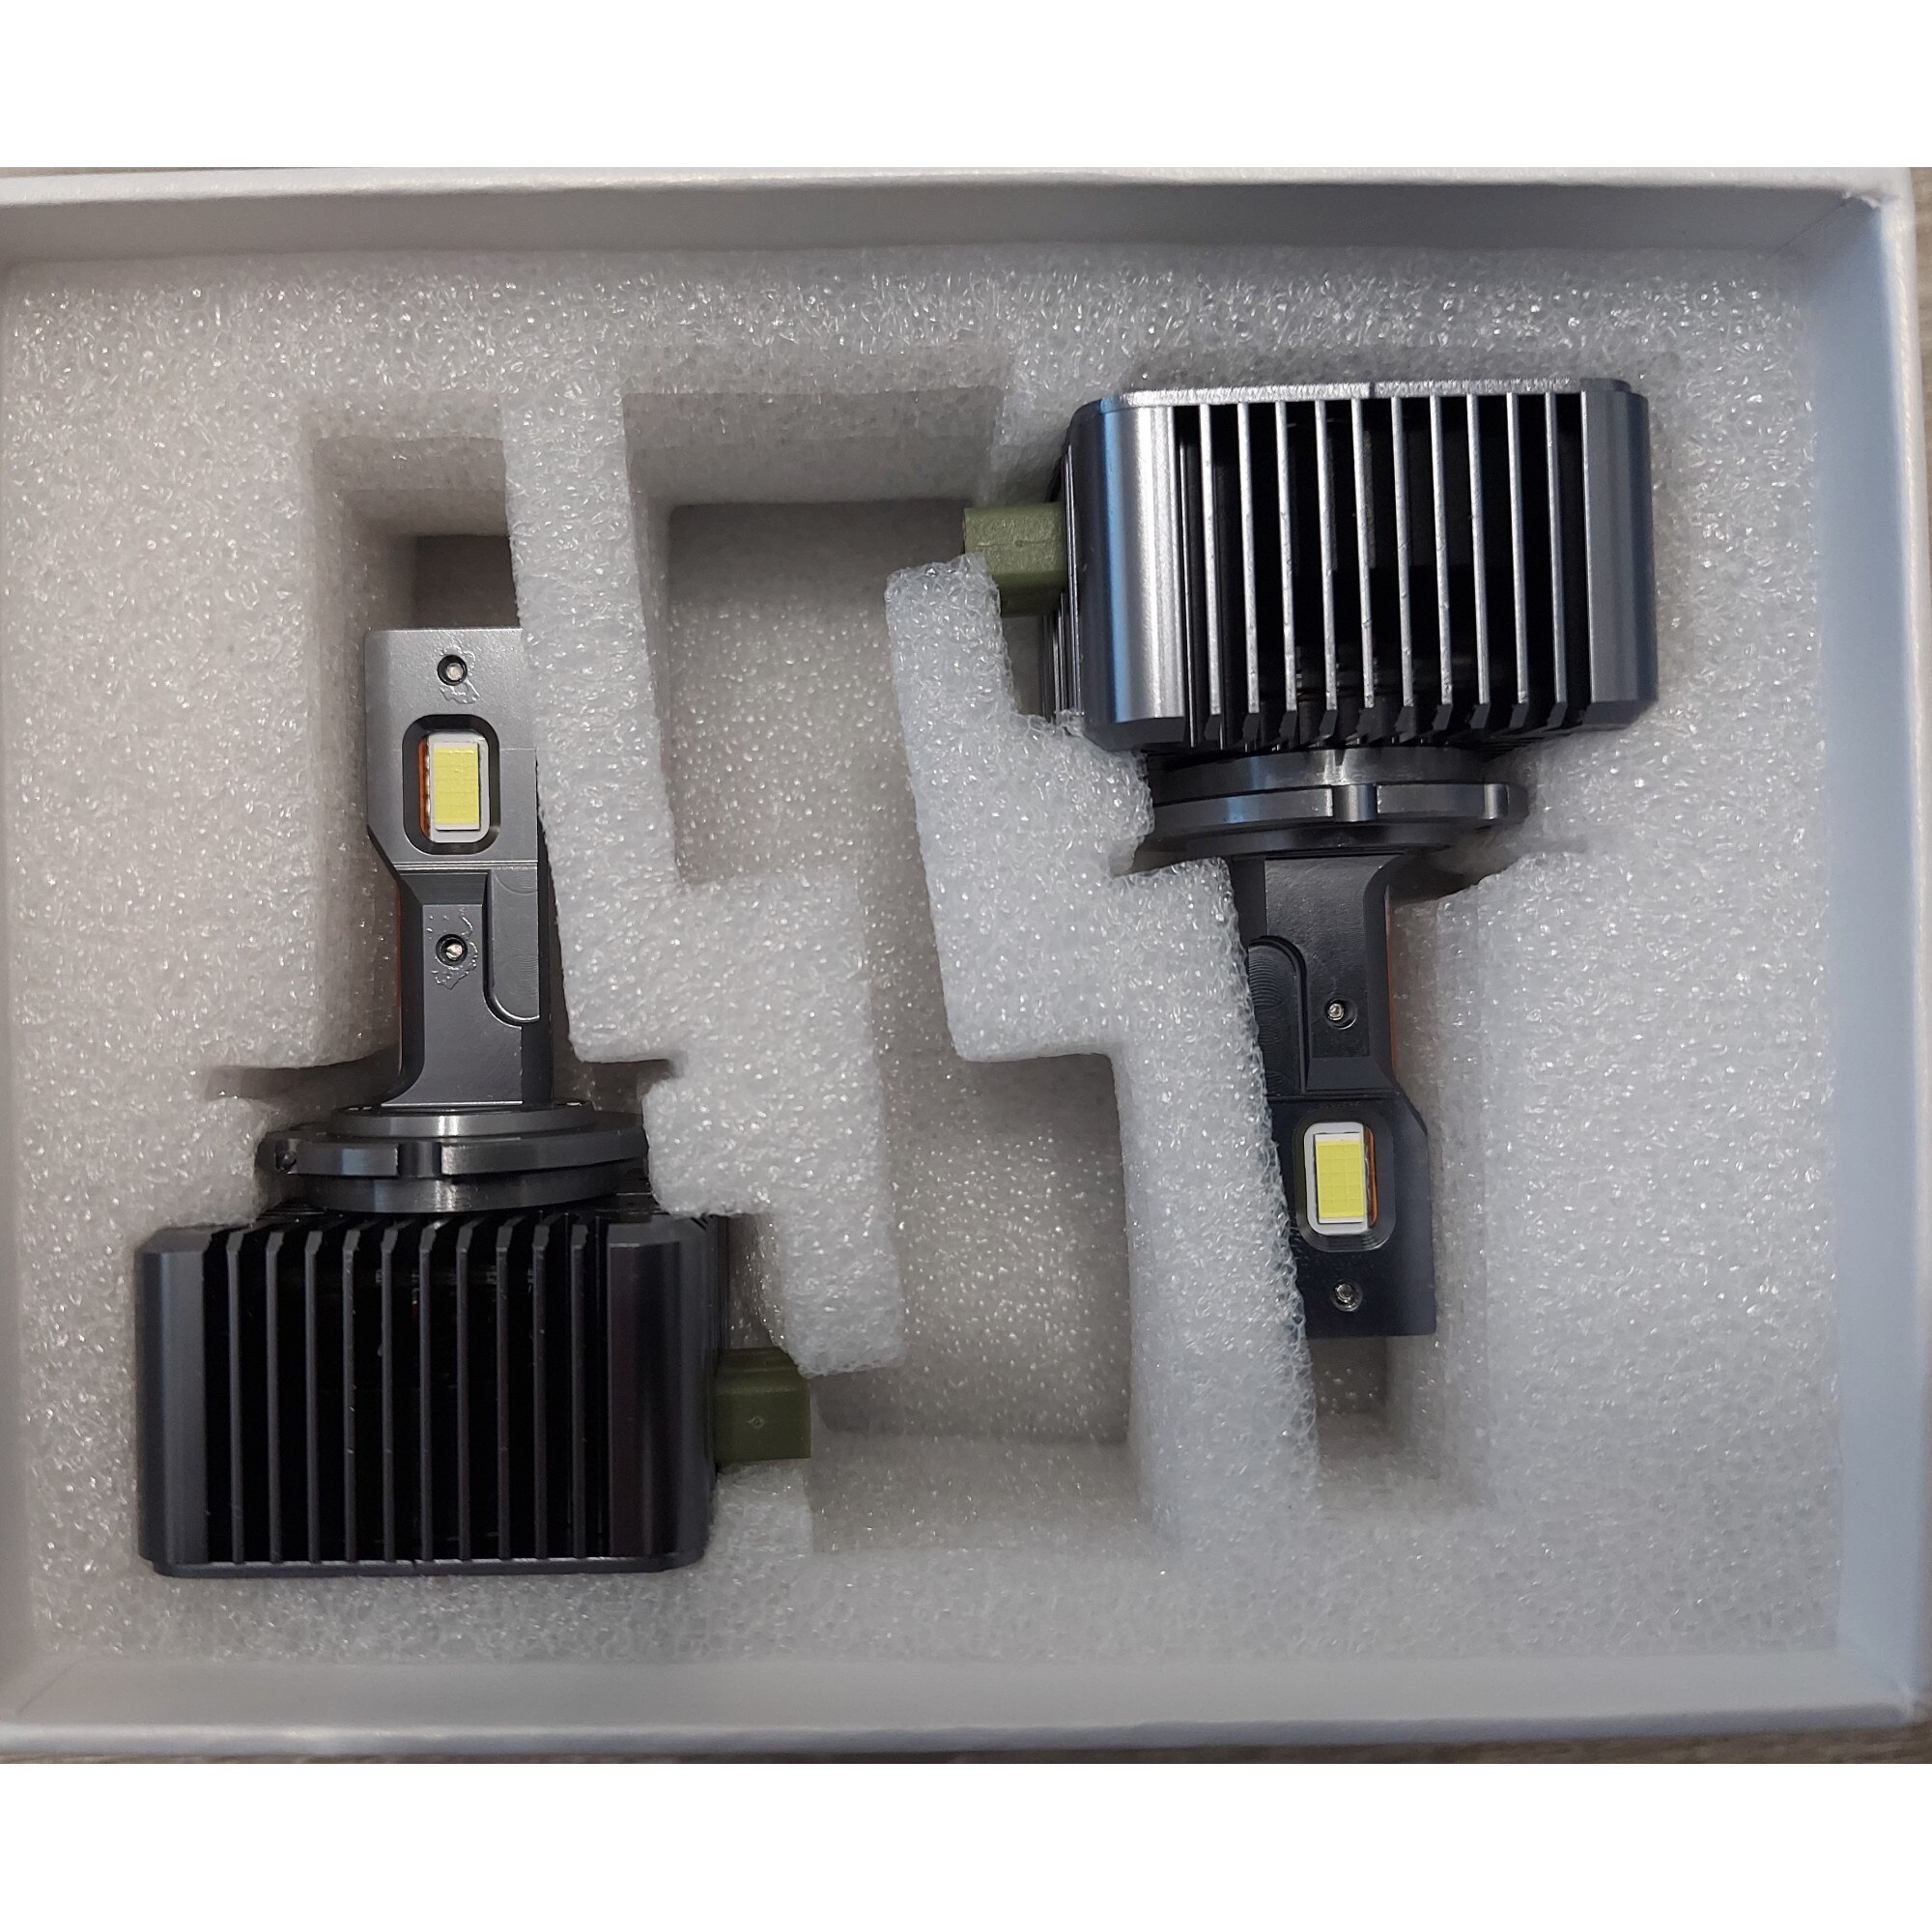 Kit de 2 becuri led conversie HID to LED D2s/r plug and play